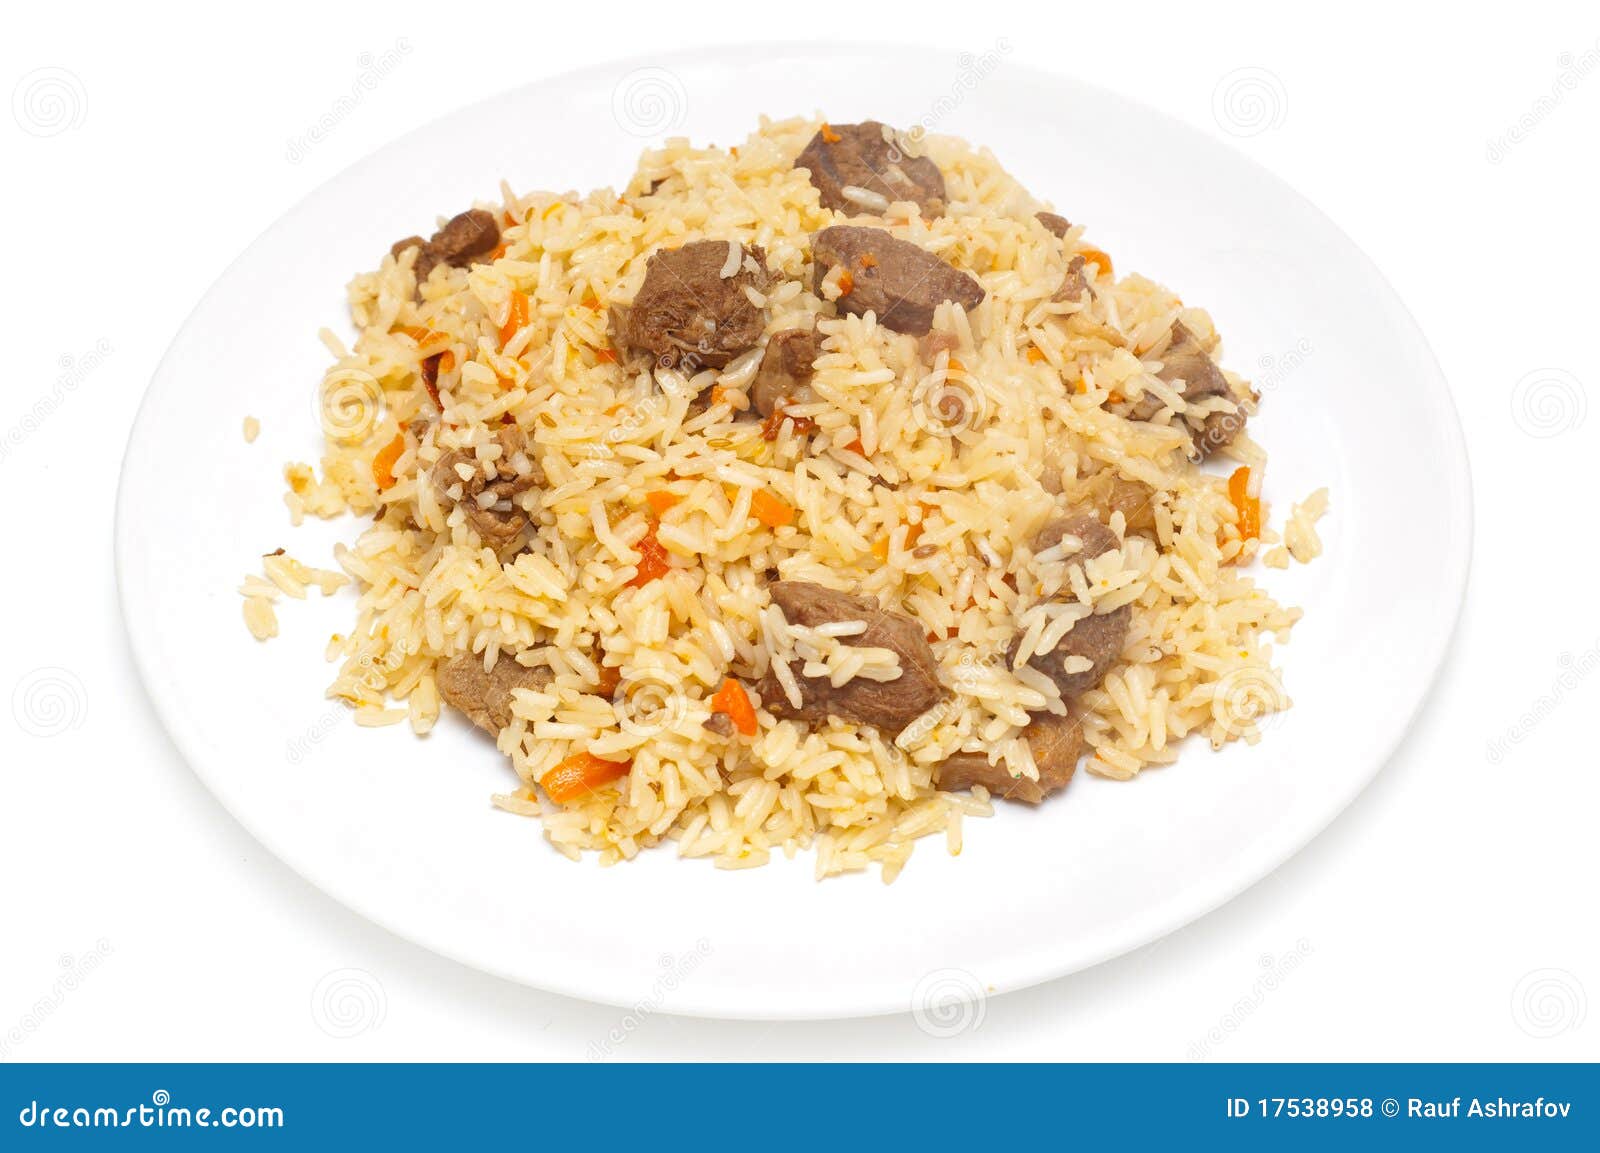 https://thumbs.dreamstime.com/z/caucasian-traditional-pilaf-rice-meat-17538958.jpg